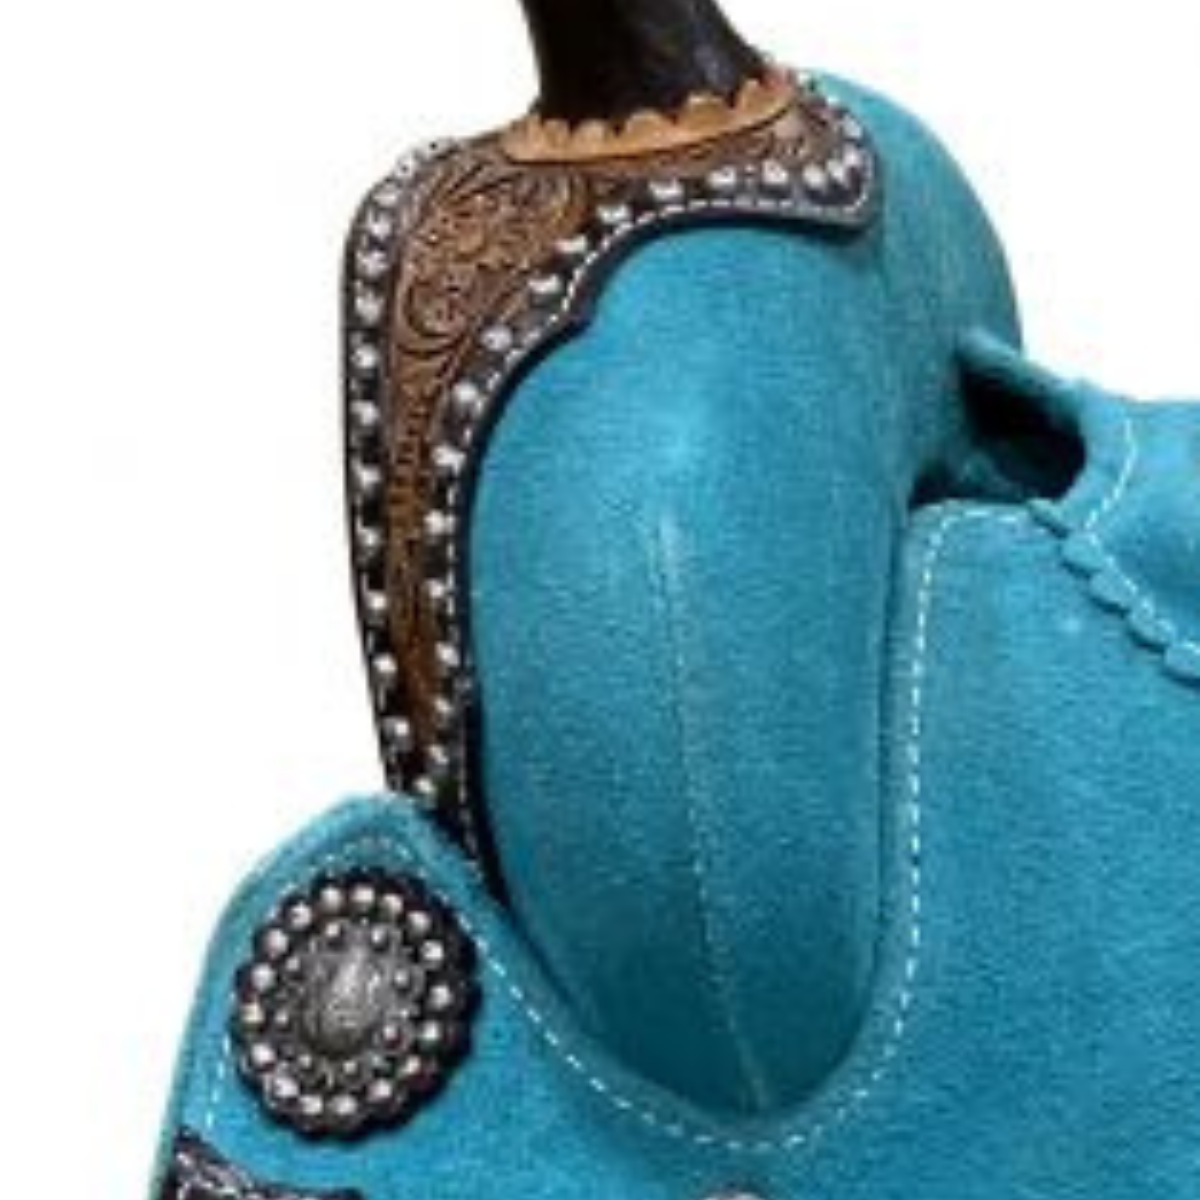 12" DOUBLE T TEAL ROUGH OUT BARREL STYLE SADDLE WITH SOUTHWEST PRINTED INLAY - Double T Saddles